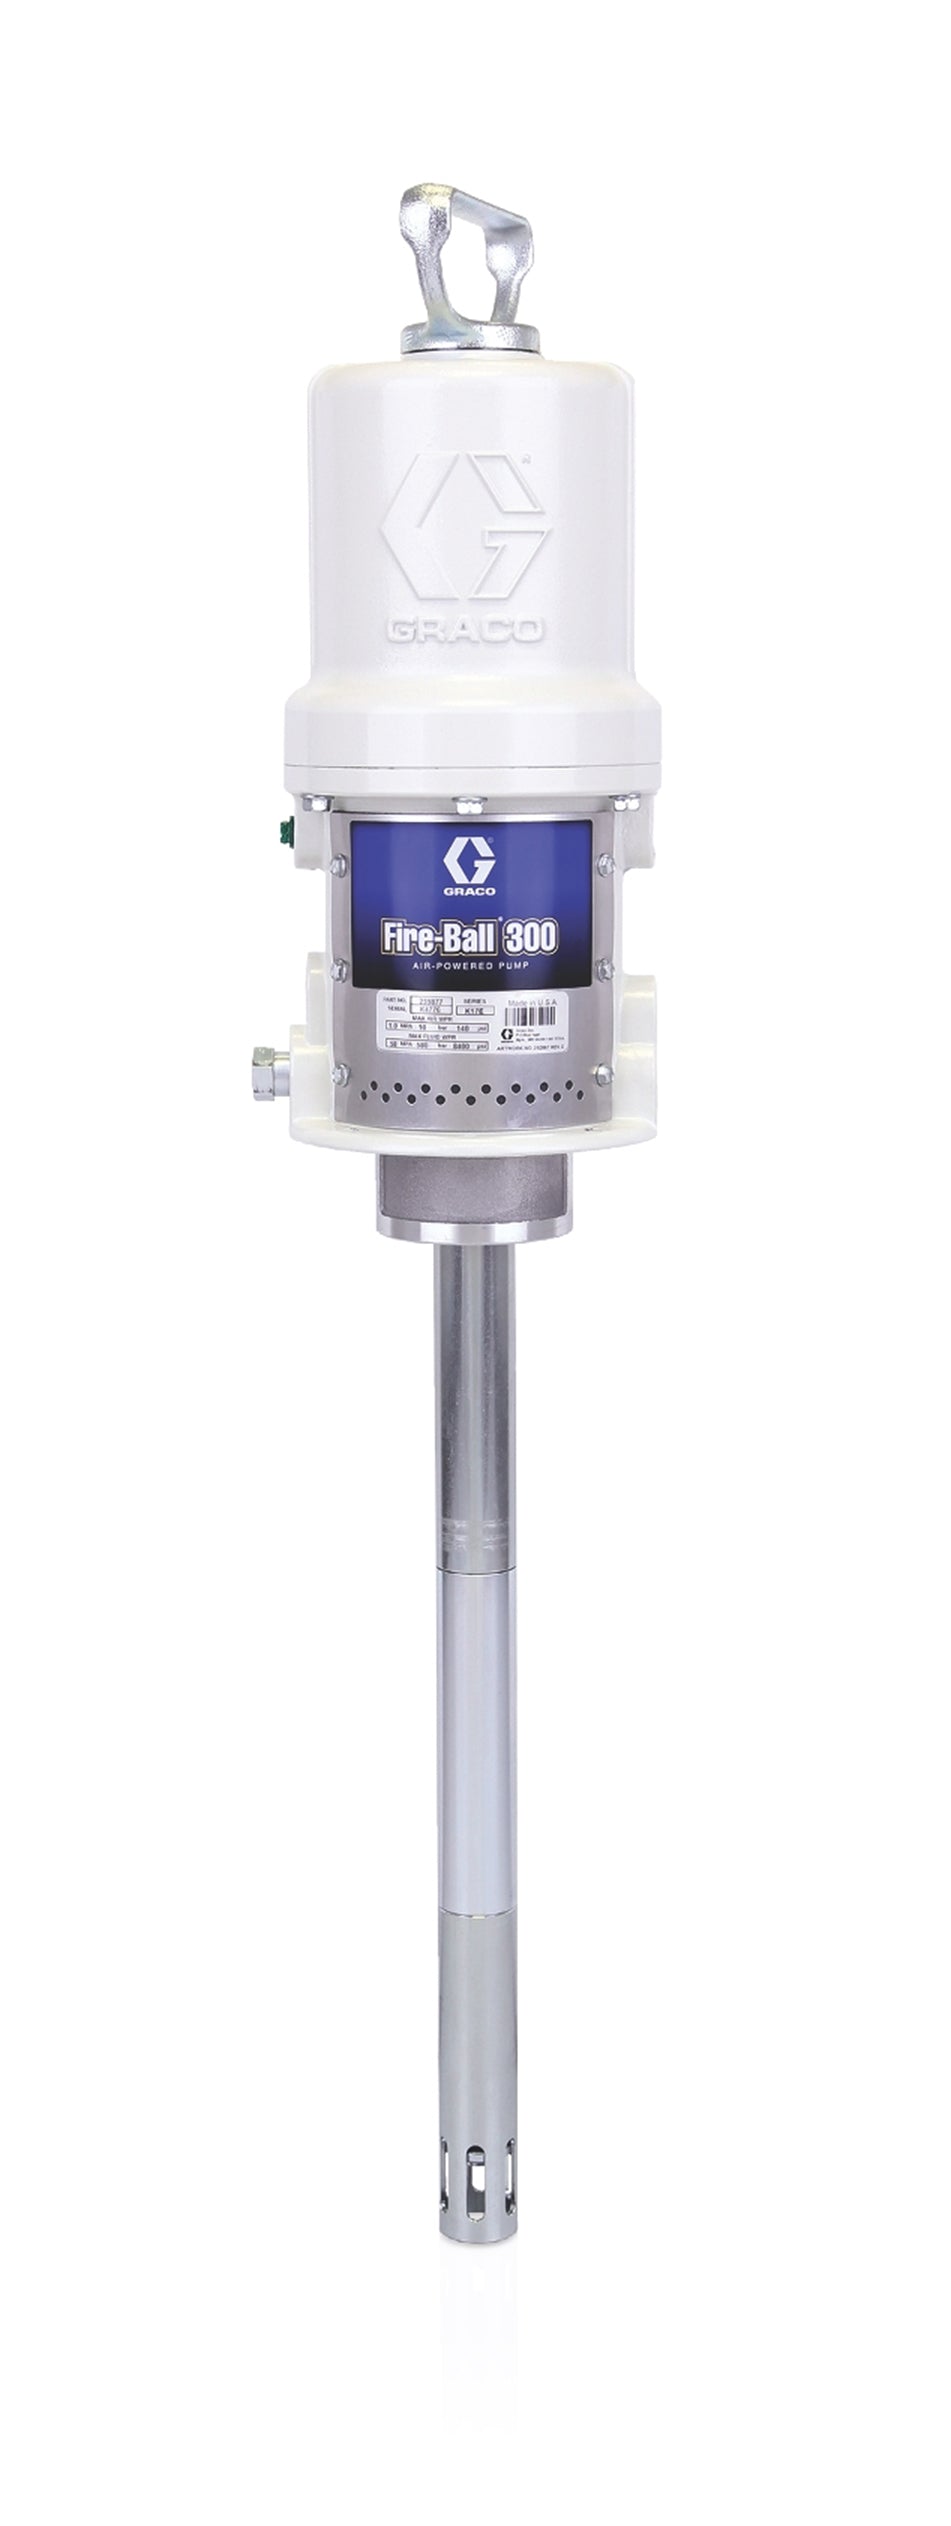 Graco 239877 Fire-Ball 300 Series 50:1 35 or 70 lb (16 or 32 kg). Pail Grease Pump